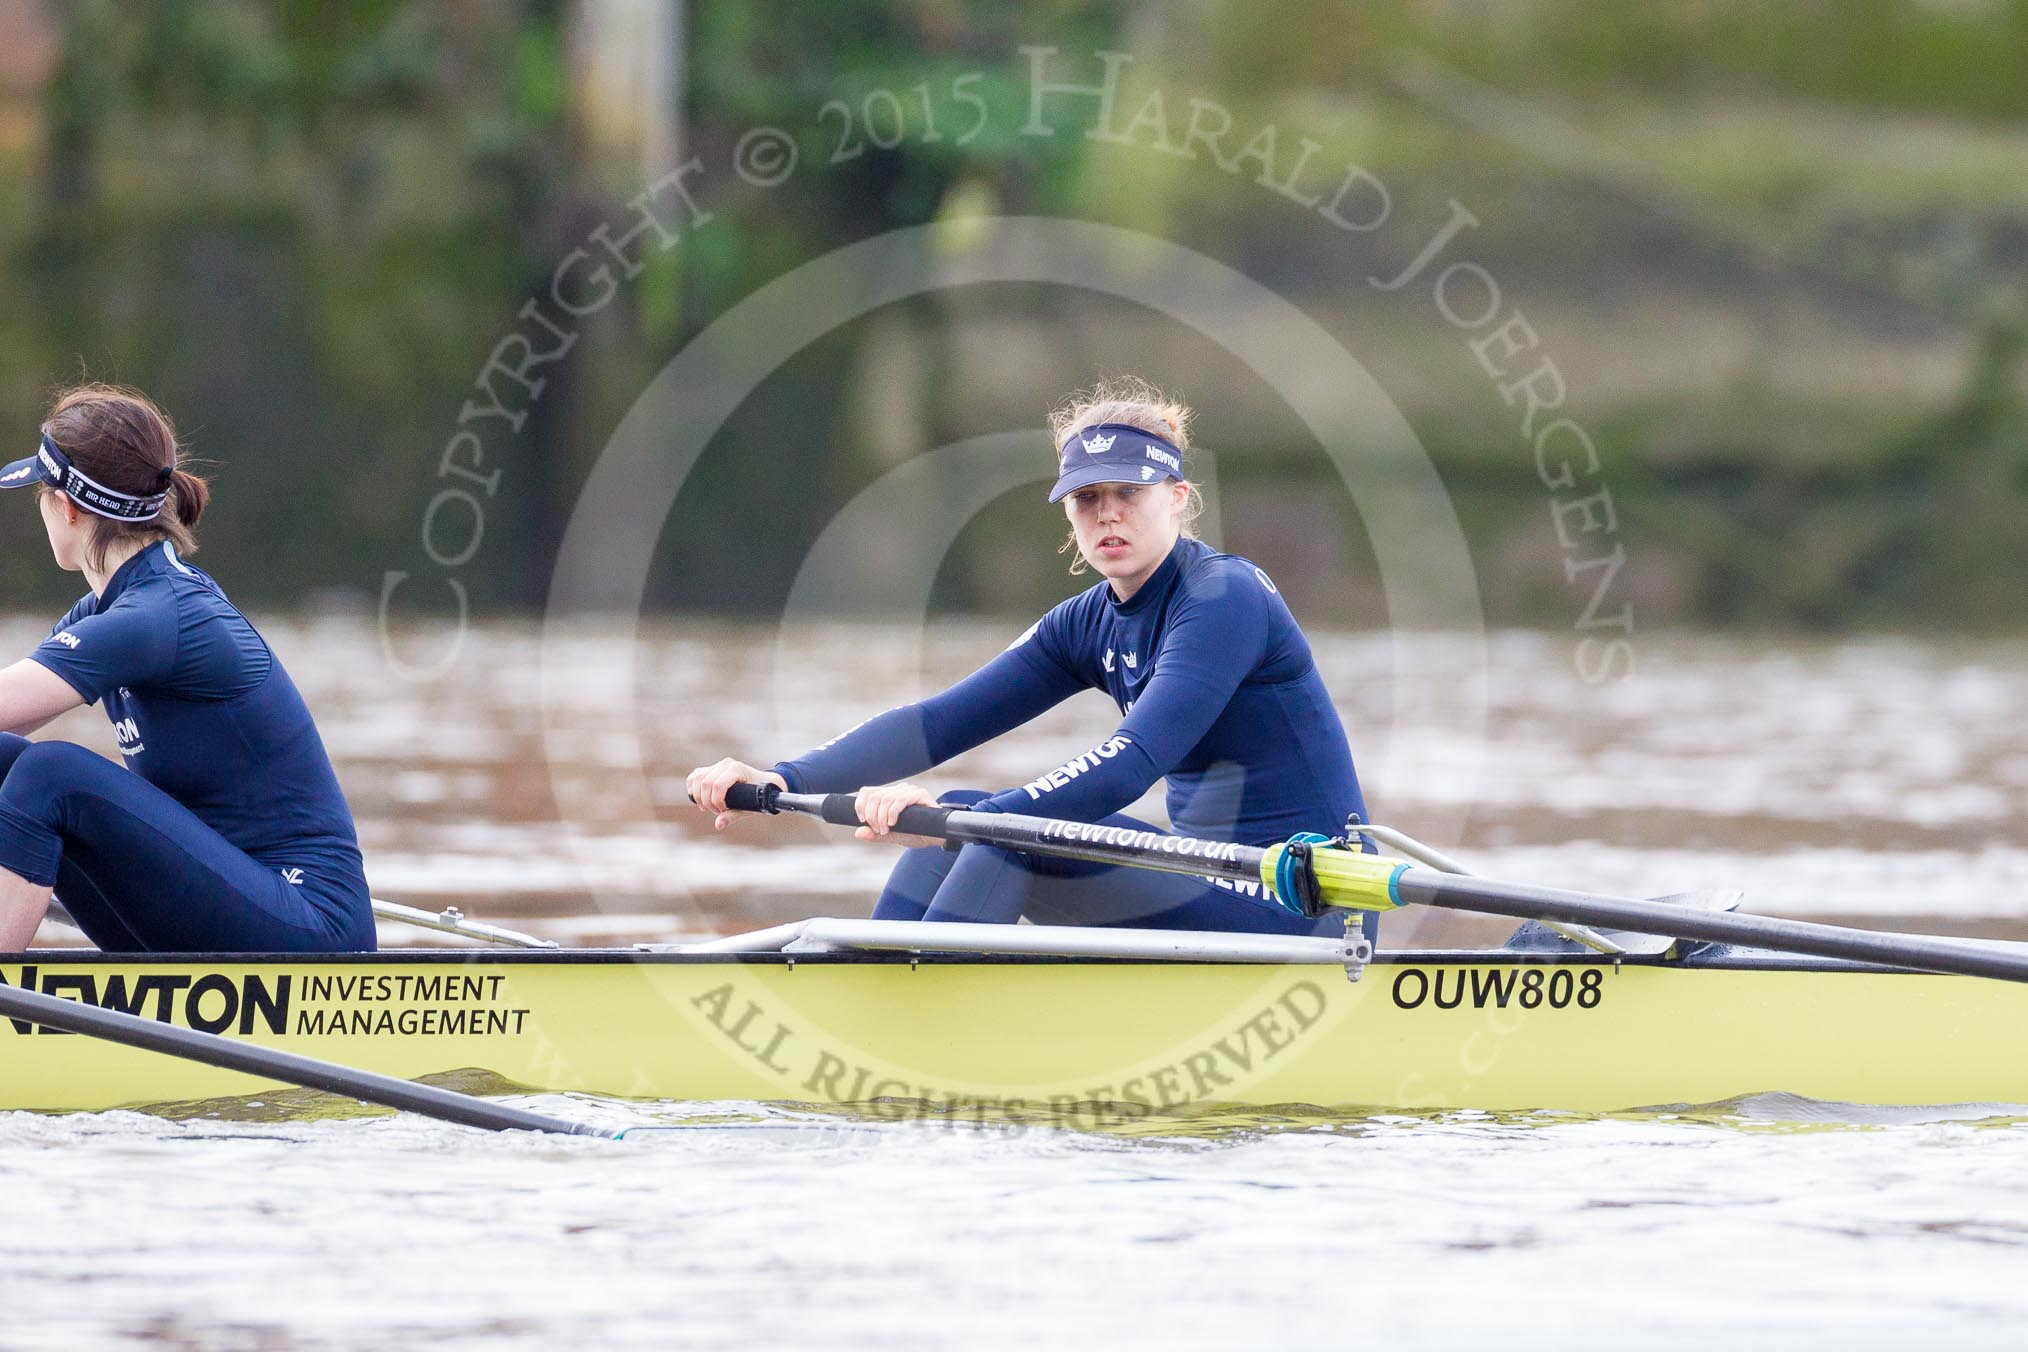 The Boat Race season 2016 - Women's Boat Race Trial Eights (OUWBC, Oxford): "Charybdis" ready for the start of the race, here 2-Christina Fleischer, bow-Georgie Daniell.
River Thames between Putney Bridge and Mortlake,
London SW15,

United Kingdom,
on 10 December 2015 at 12:18, image #133